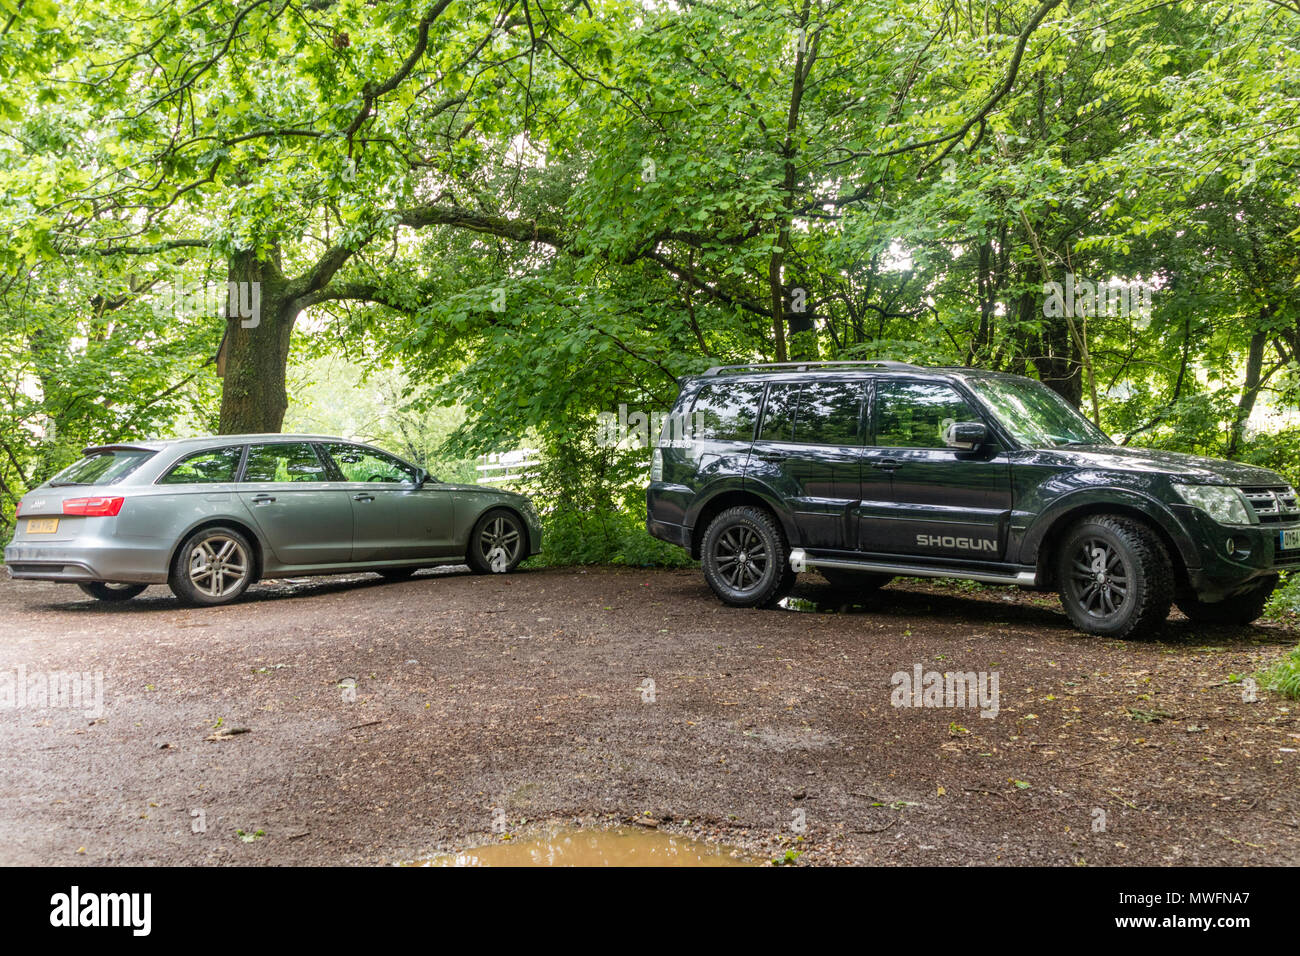 Inconsiderate parking, a 4x4 taking up two parking spaces in a rural carpark, England, UK Stock Photo